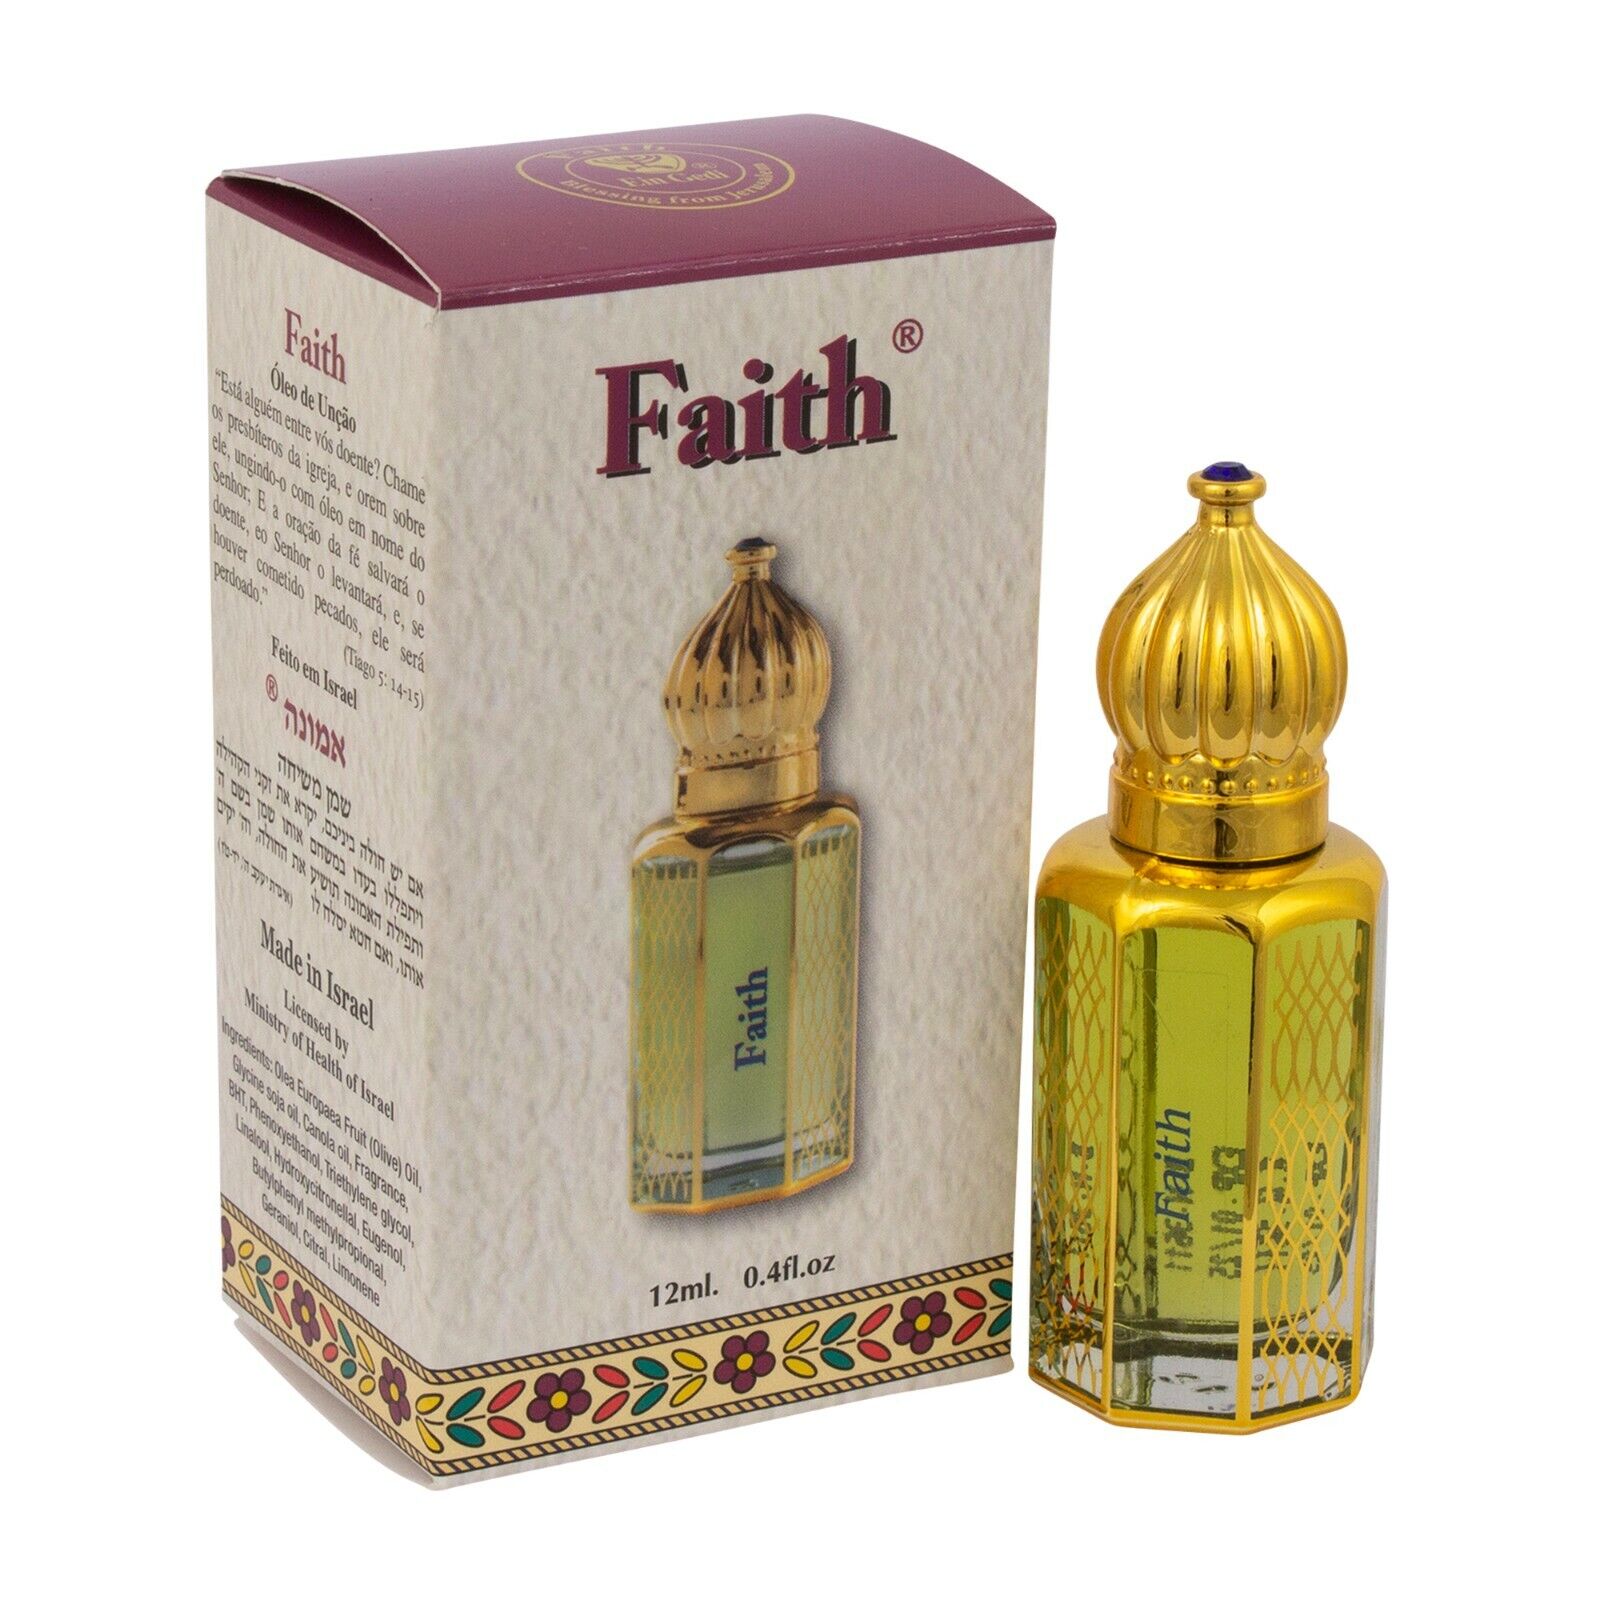 Consecrated Faith Anointing Oil Aromatic Roll-on Glass bottle for Prayers 12ml